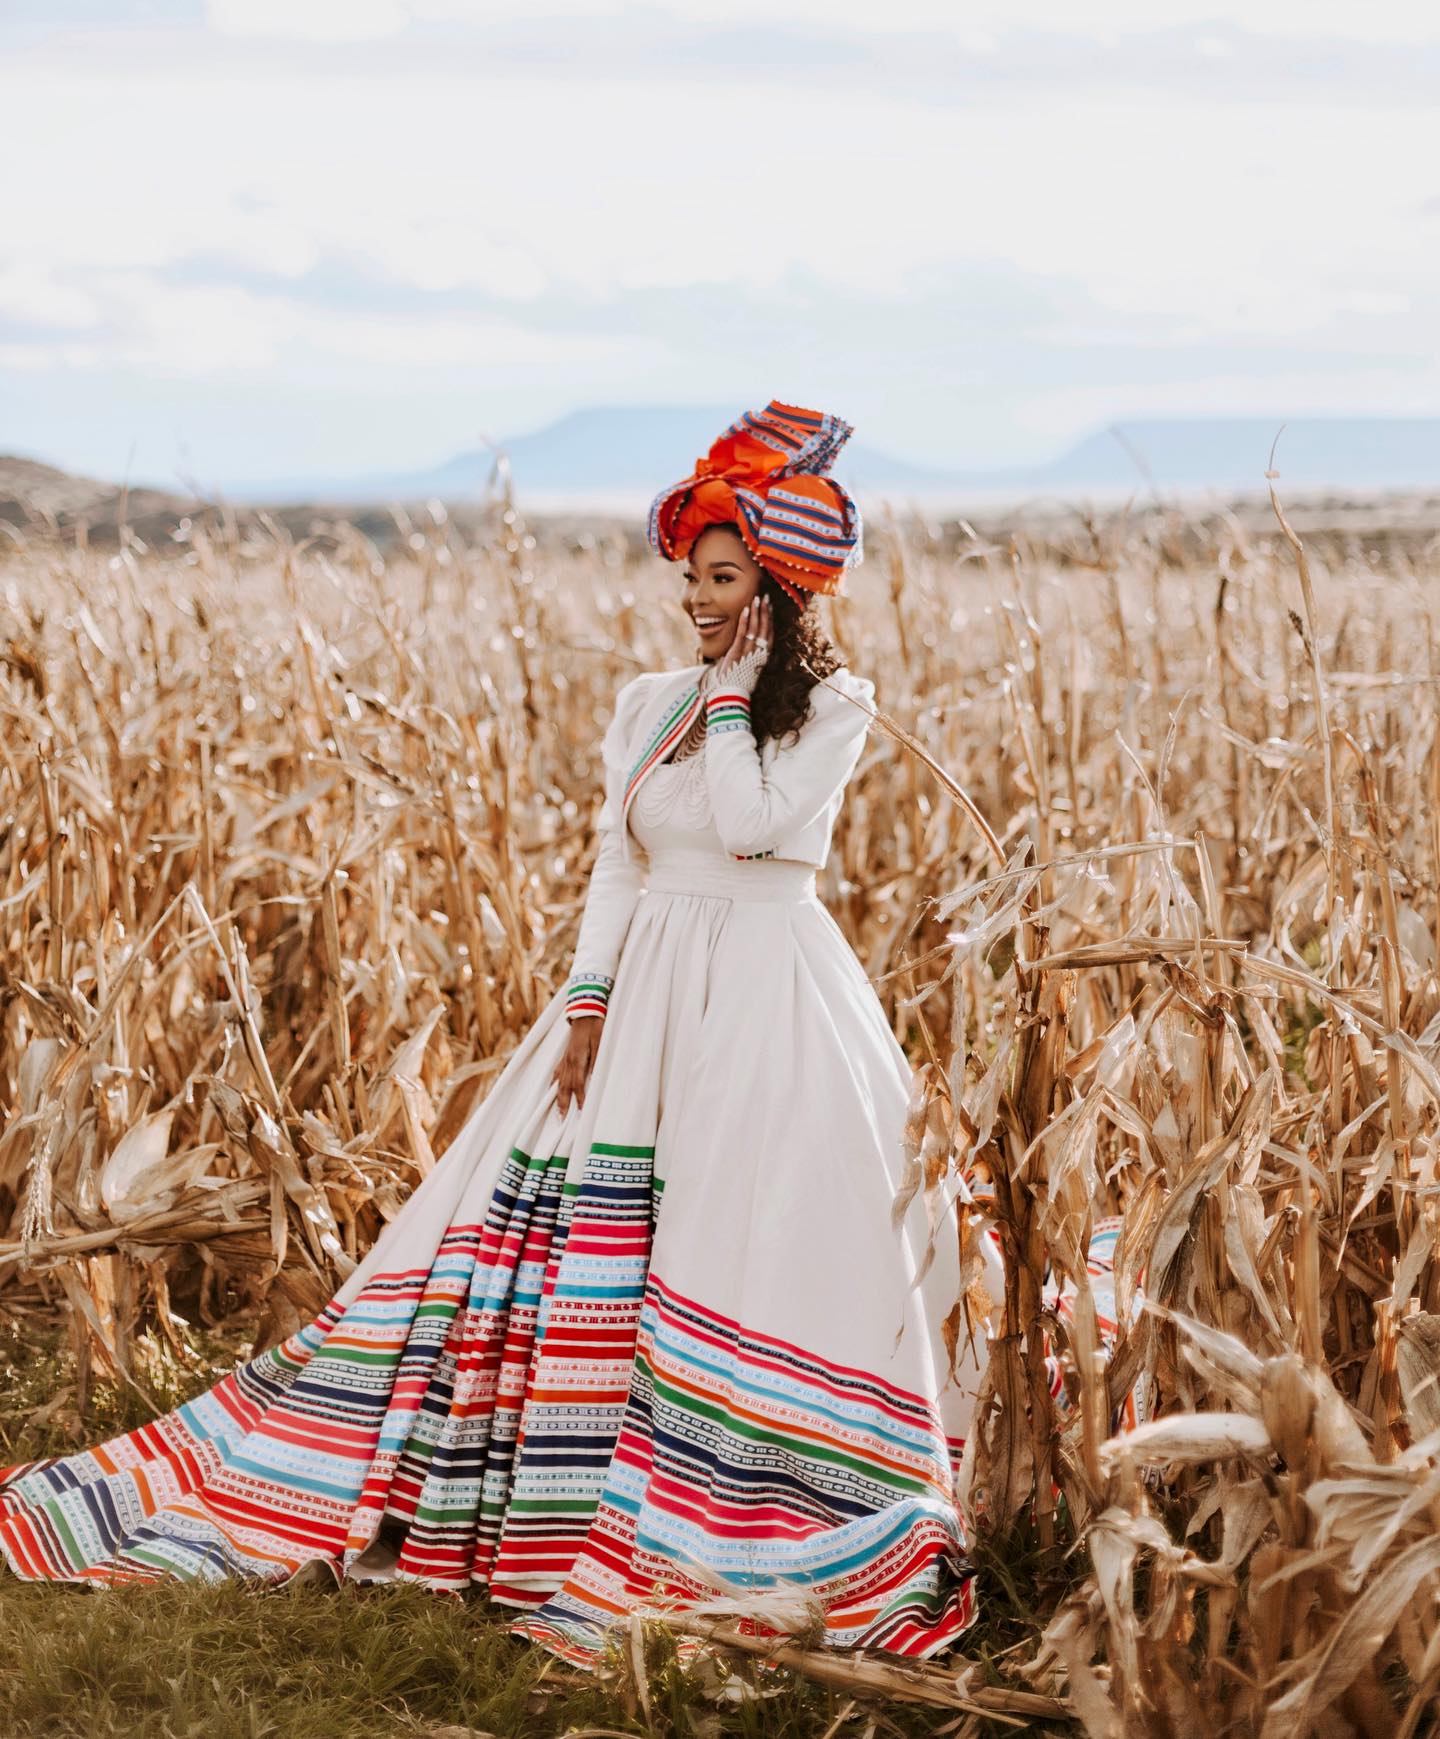 Wearing Xhosa Heritage: Dresses that Sing with Cultural Pride 26